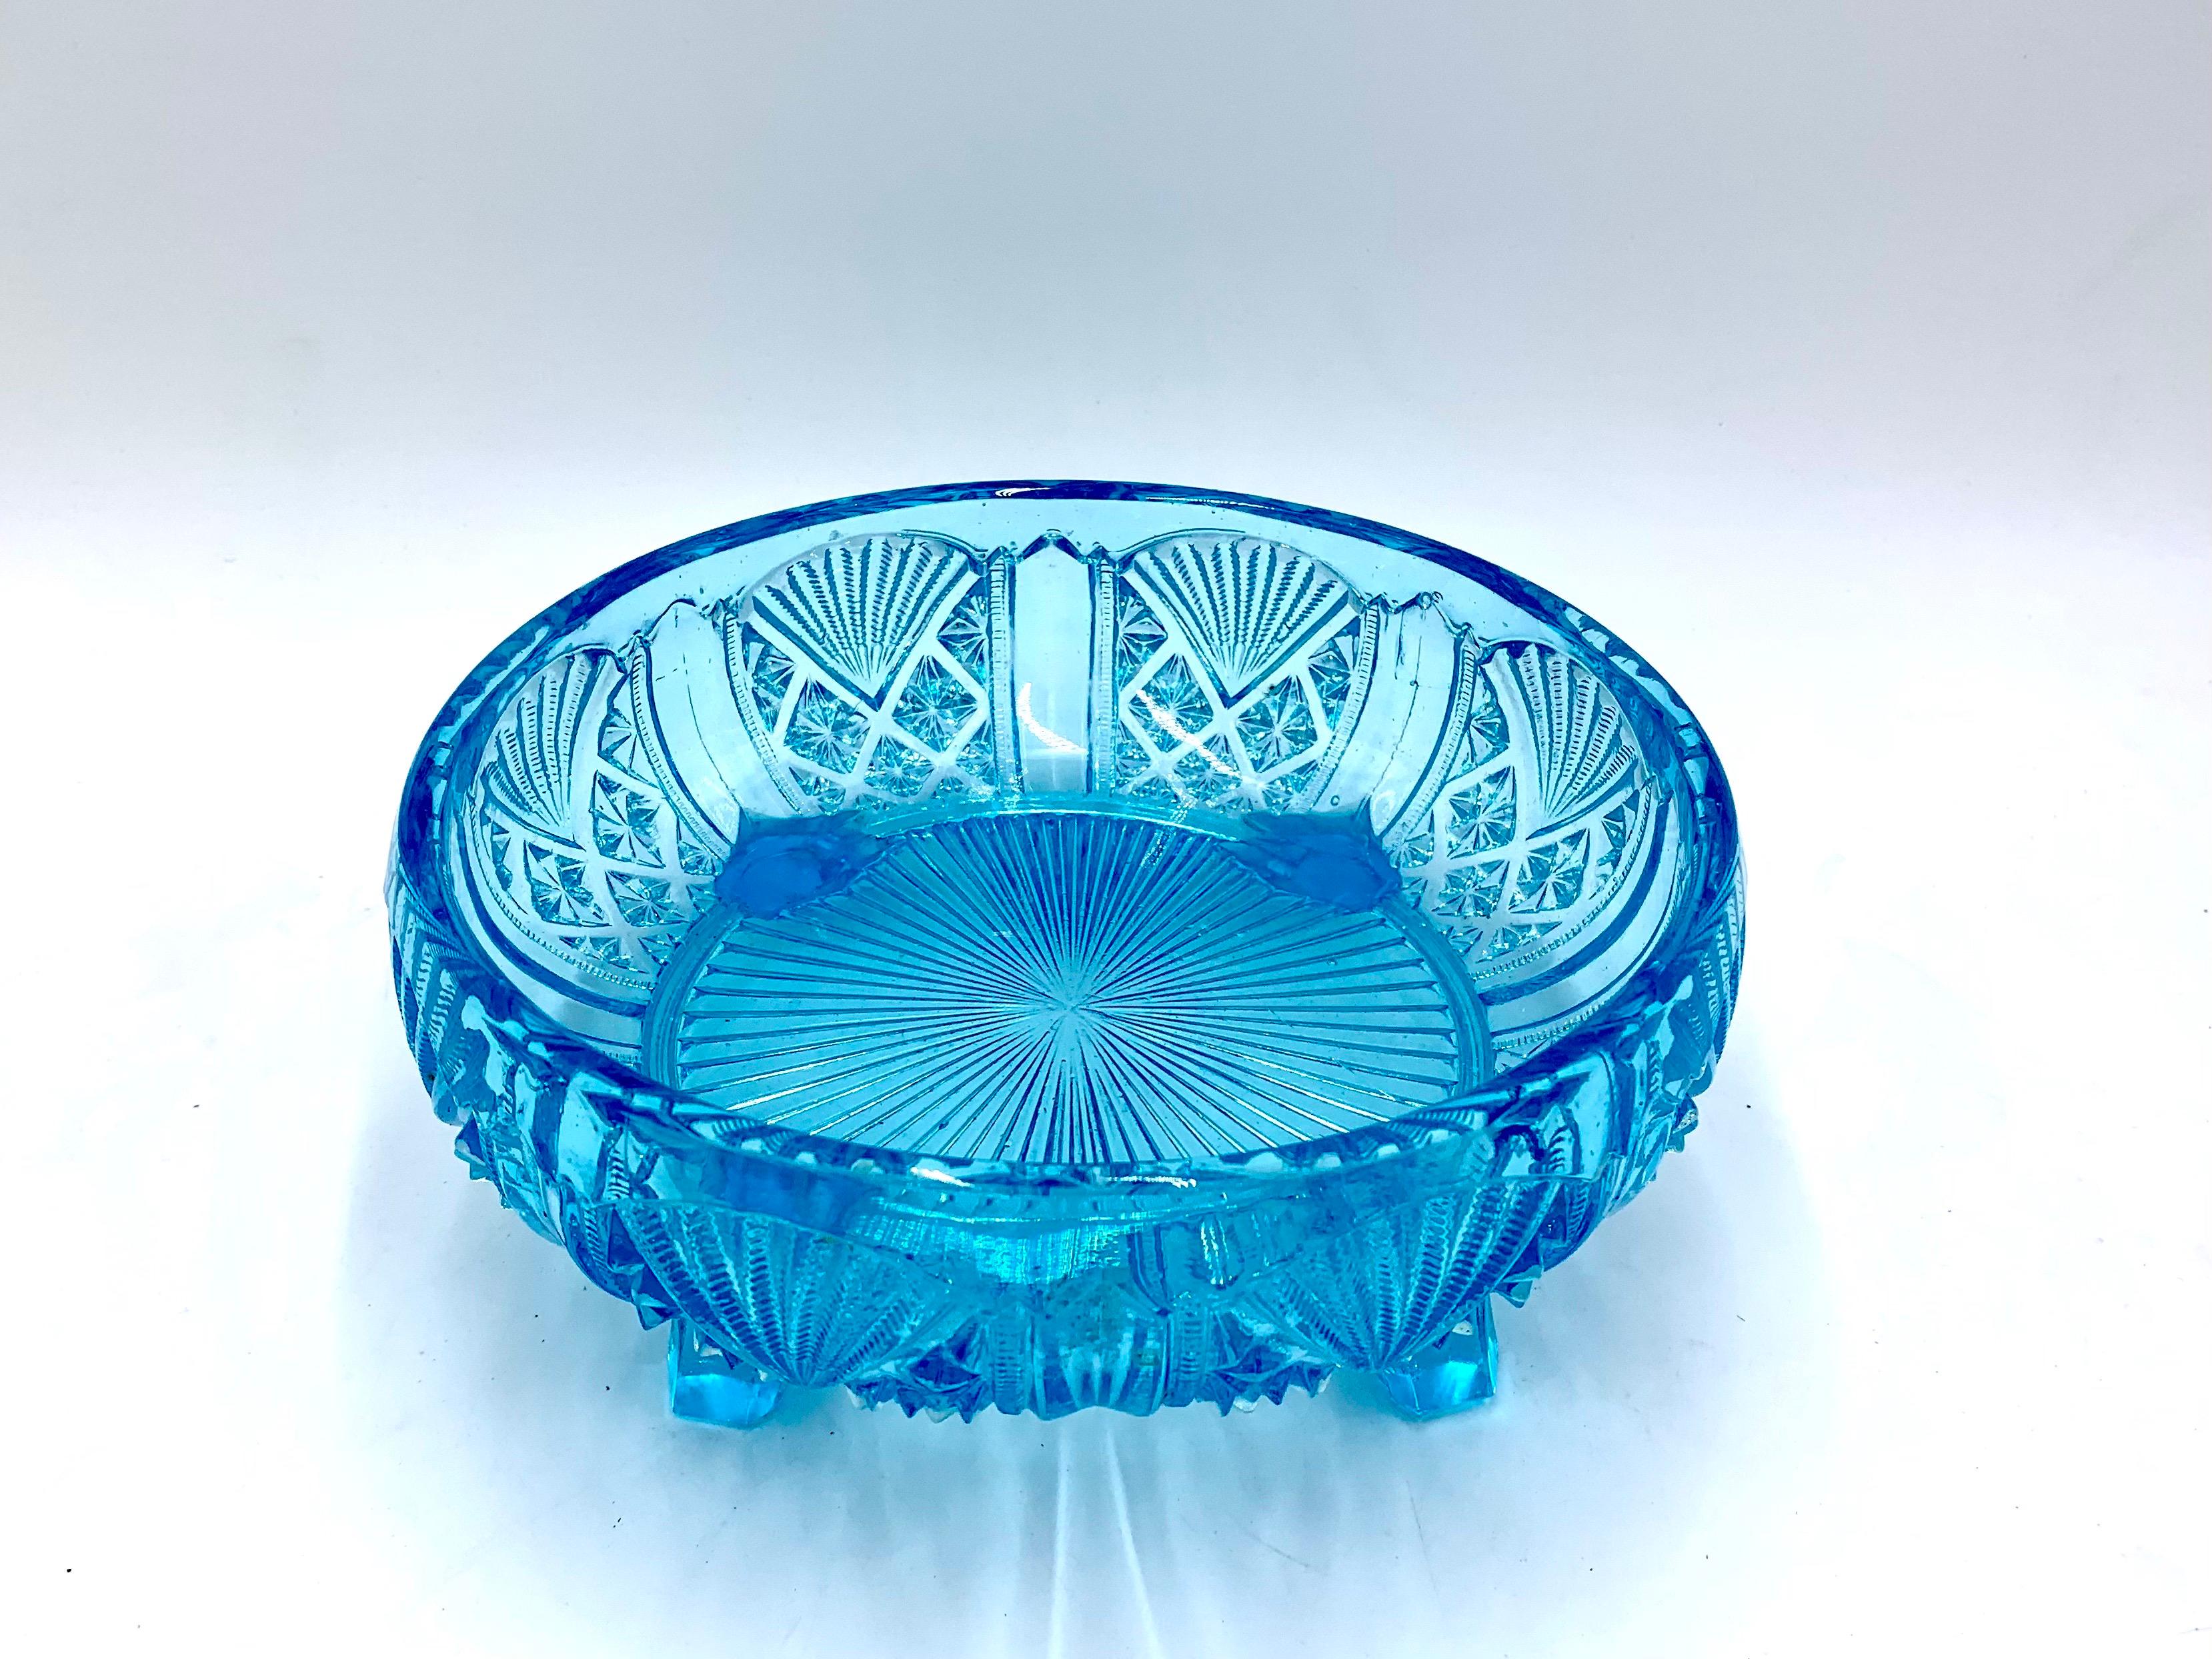 A turquoise Art Deco bowl supported on four legs made of pressed glass

It comes from around 1930.

Without damages

Measures: Height 9.5 cm, diameter 21.5 cm.